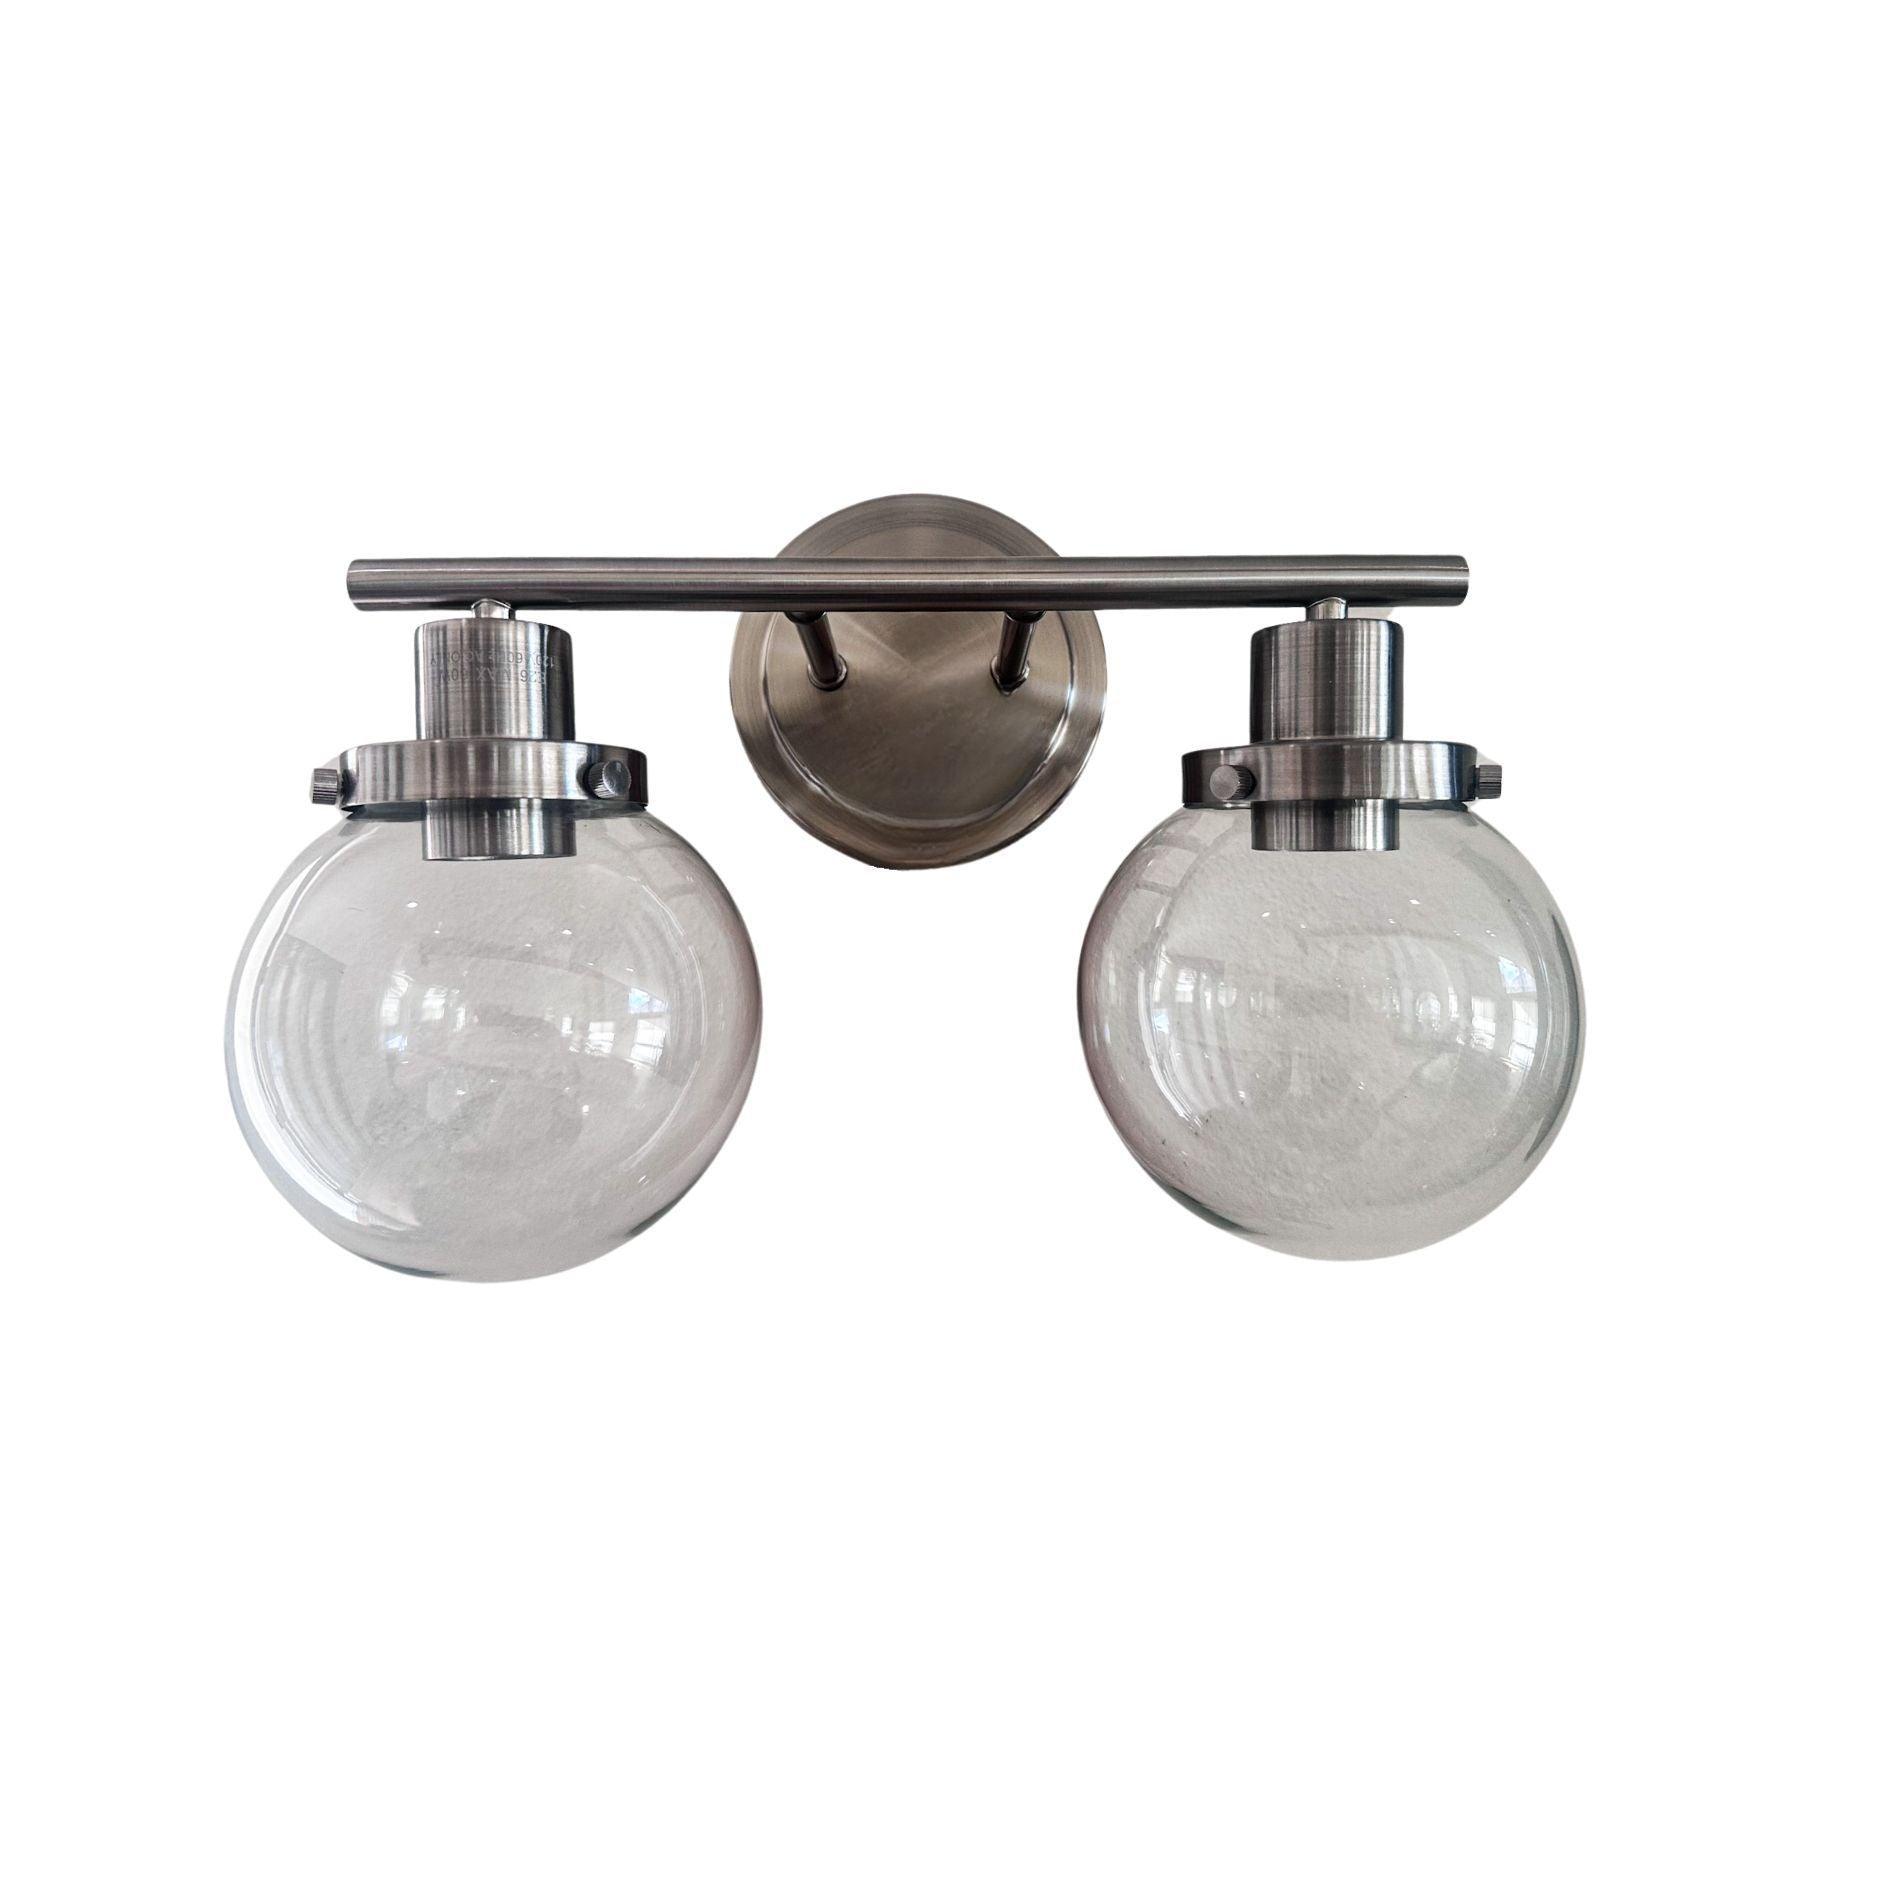 🆓🚛 Bathroom Vanity Light Fixtures, 2-Light Black Wall Sconce Lighting Wall Lamp With Clear Glass Shade, Vintage Wall Mounted Lights Bathroom Lights for Mirror, Living Room, Bedroom, Hallway, Porch